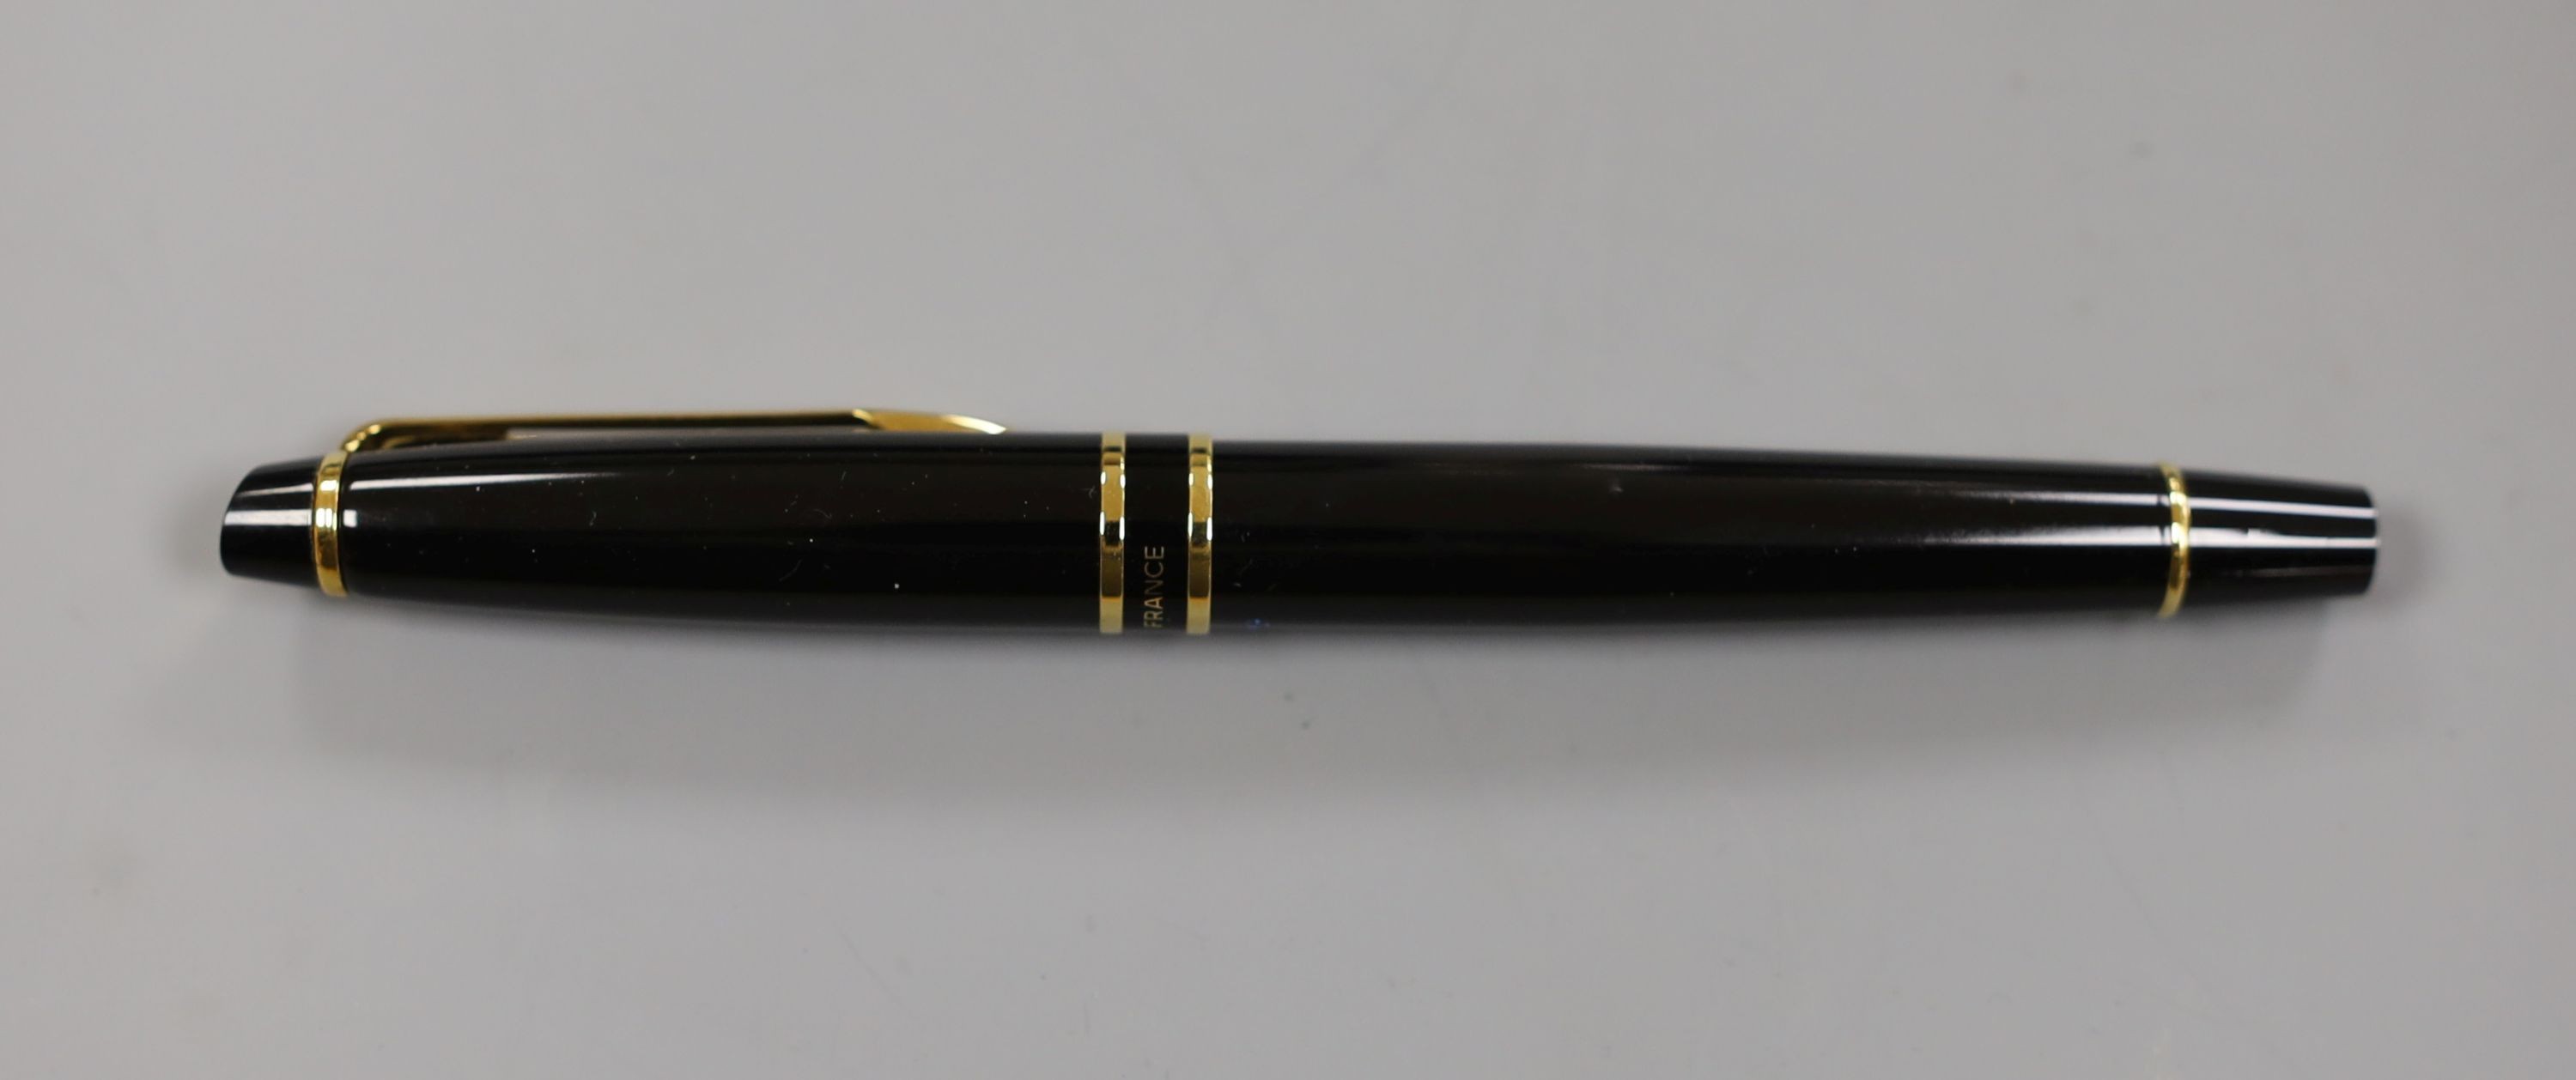 A Waterman fountain pen and ballpoint pen and a Mont Blanc Meisterstuck pen, all cased